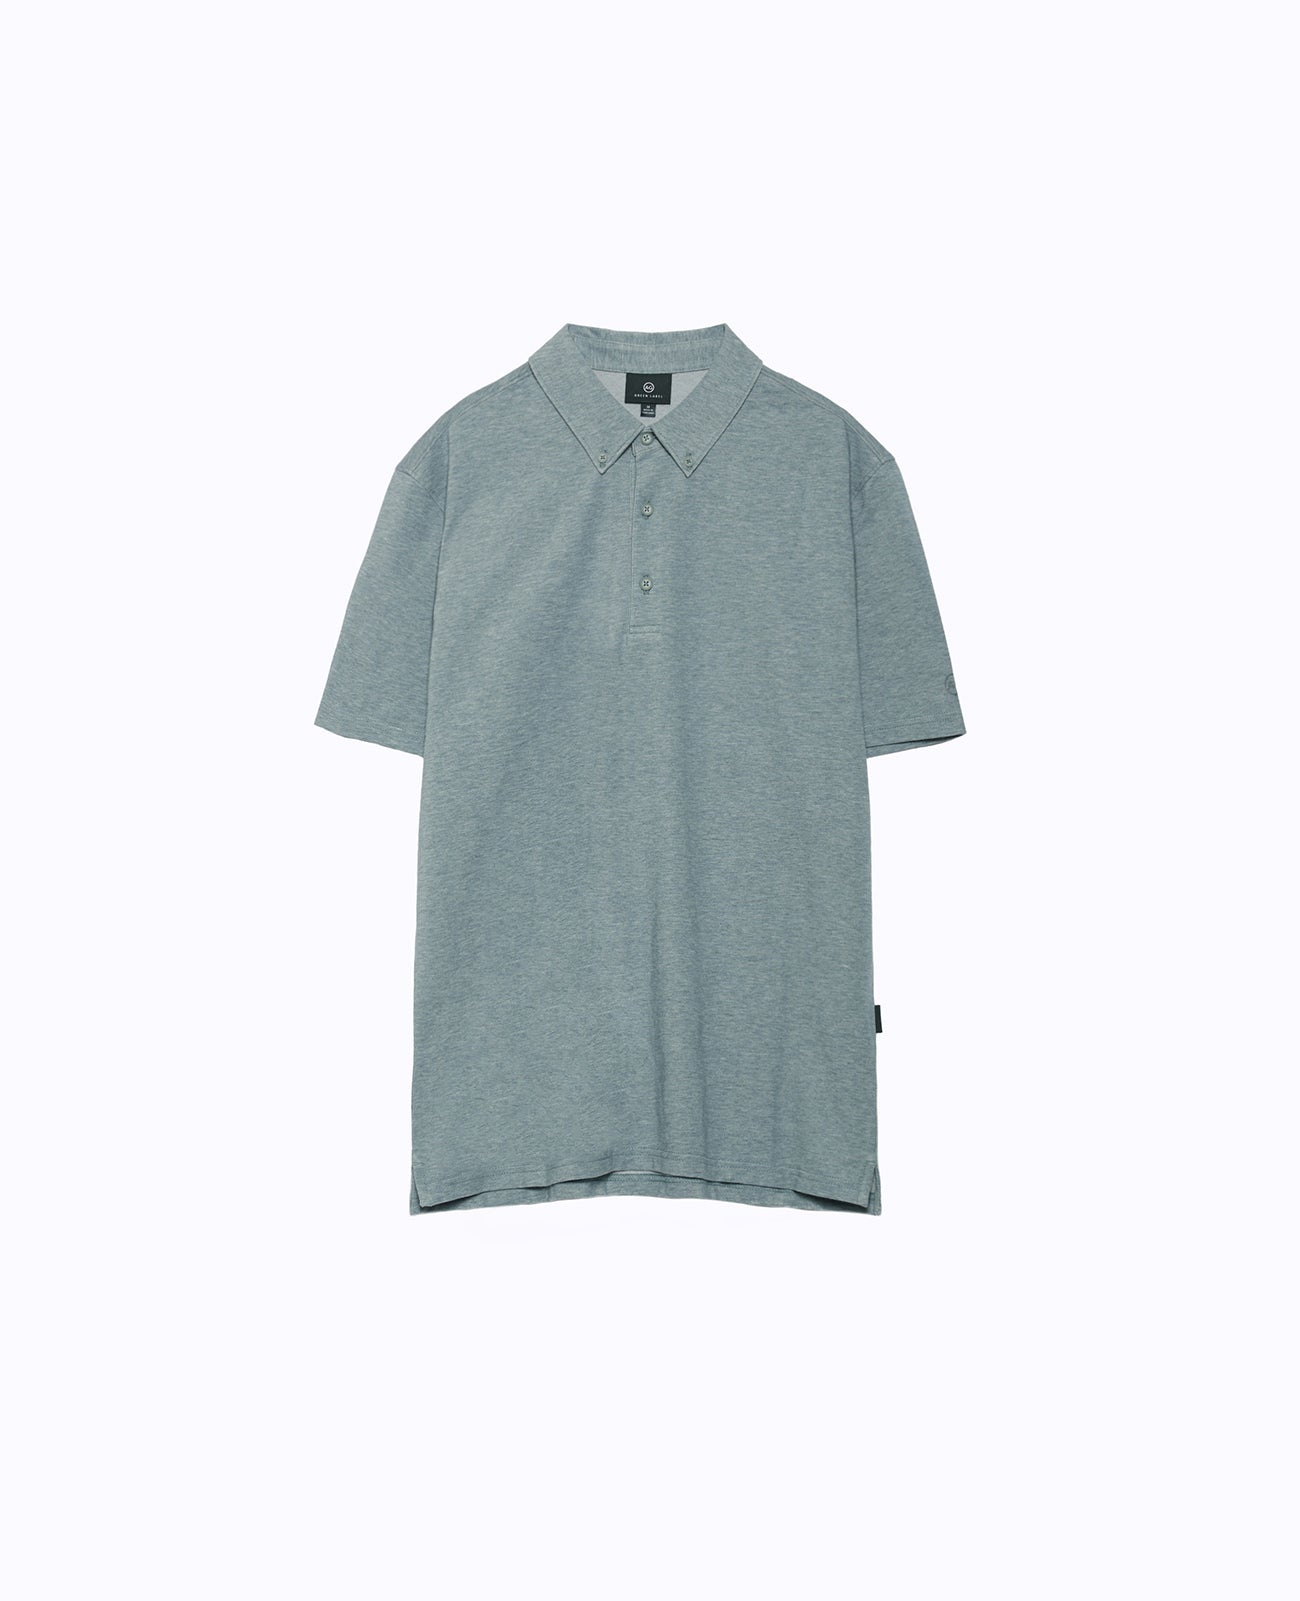 Mensa Polo Heathered Agave Green Green Label Collection Men Tops Photo 6